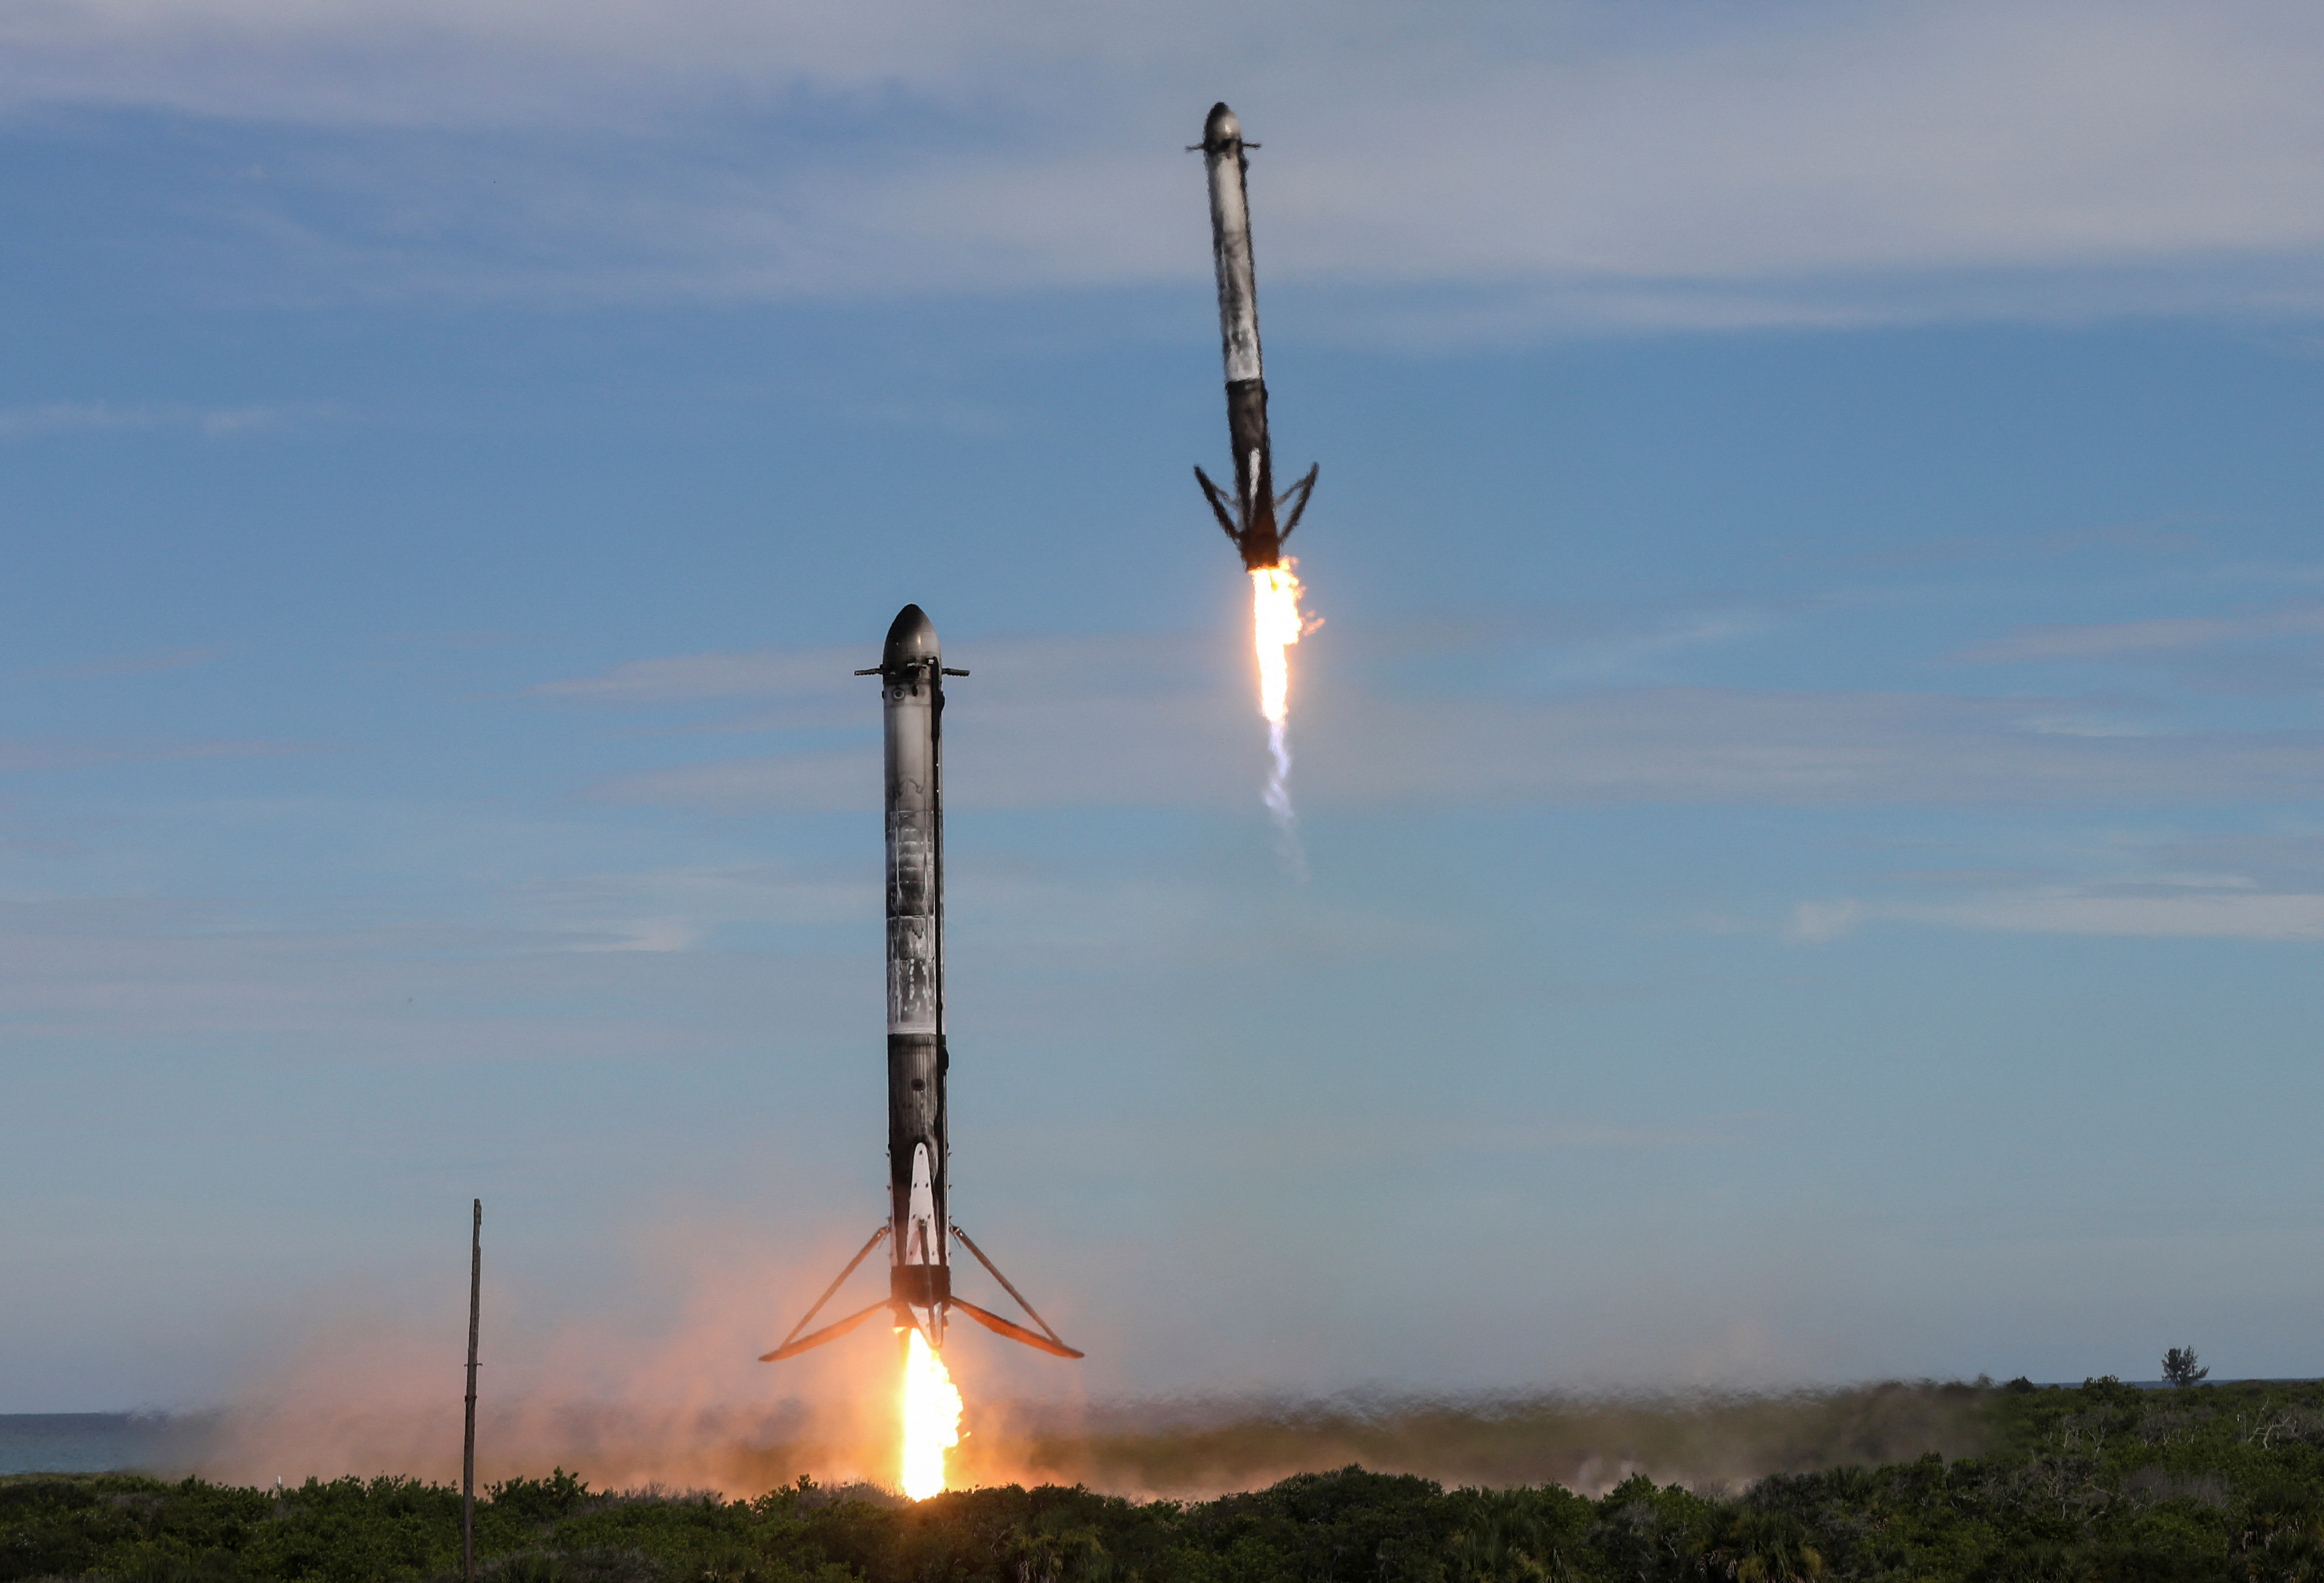 Two boosters return to the Cape Canaveral Space Force Station after launch from the nearby Kennedy Space Center in Cape Canaveral